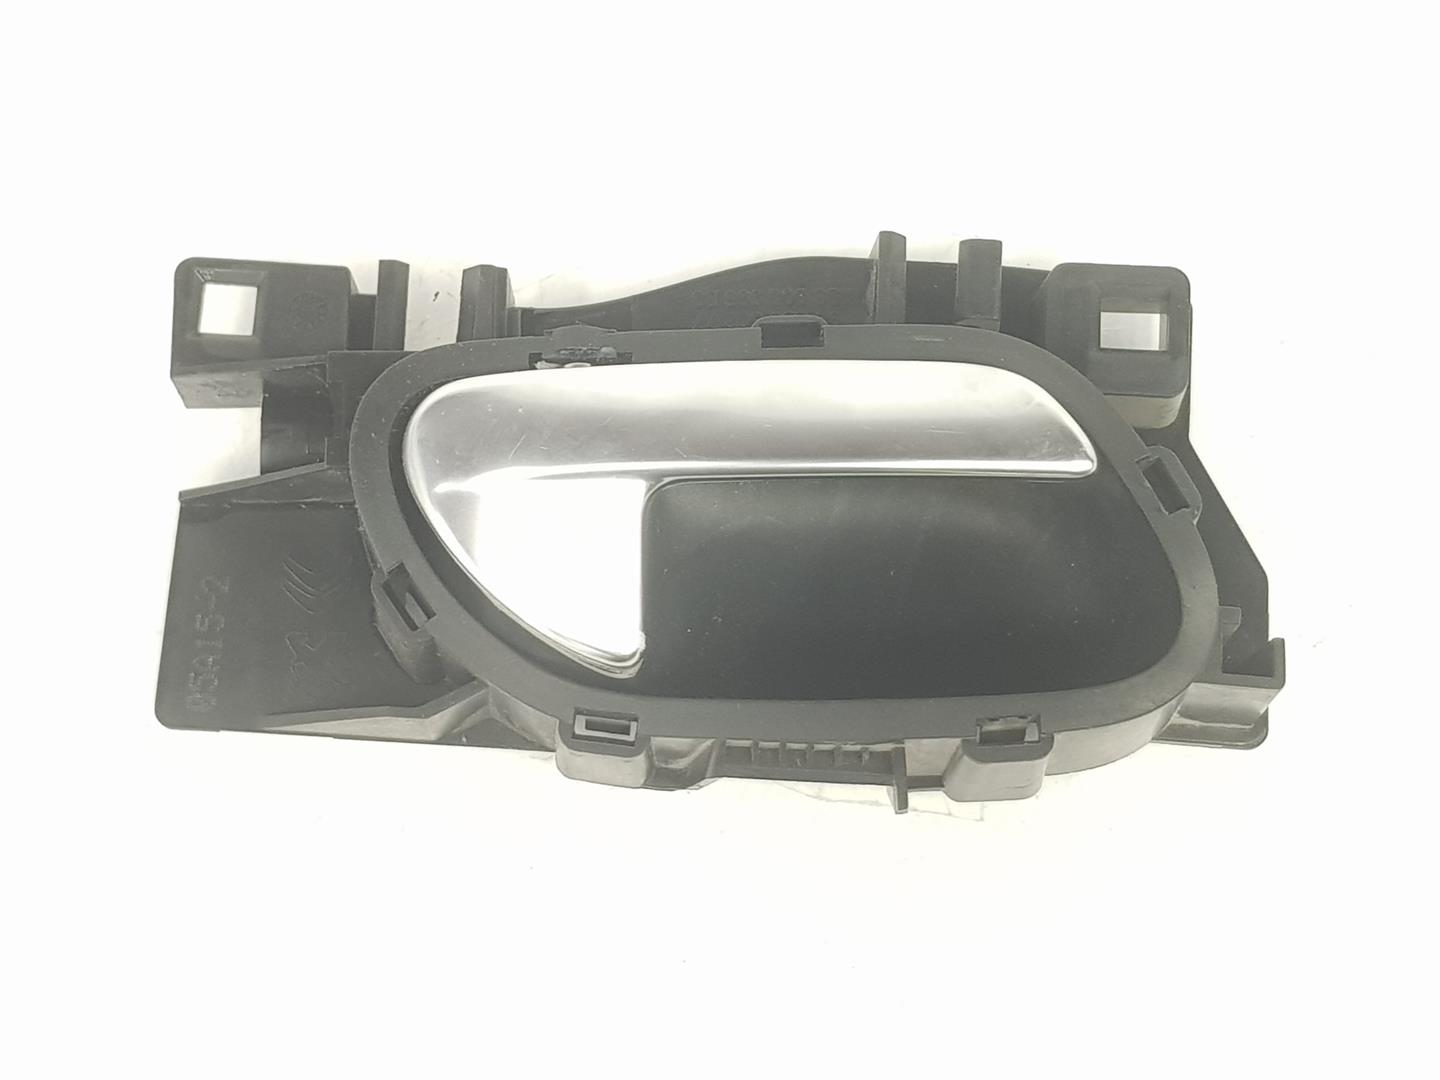 CITROËN C4 Picasso 2 generation (2013-2018) Other Interior Parts 9144G4, 9660525380 24192730